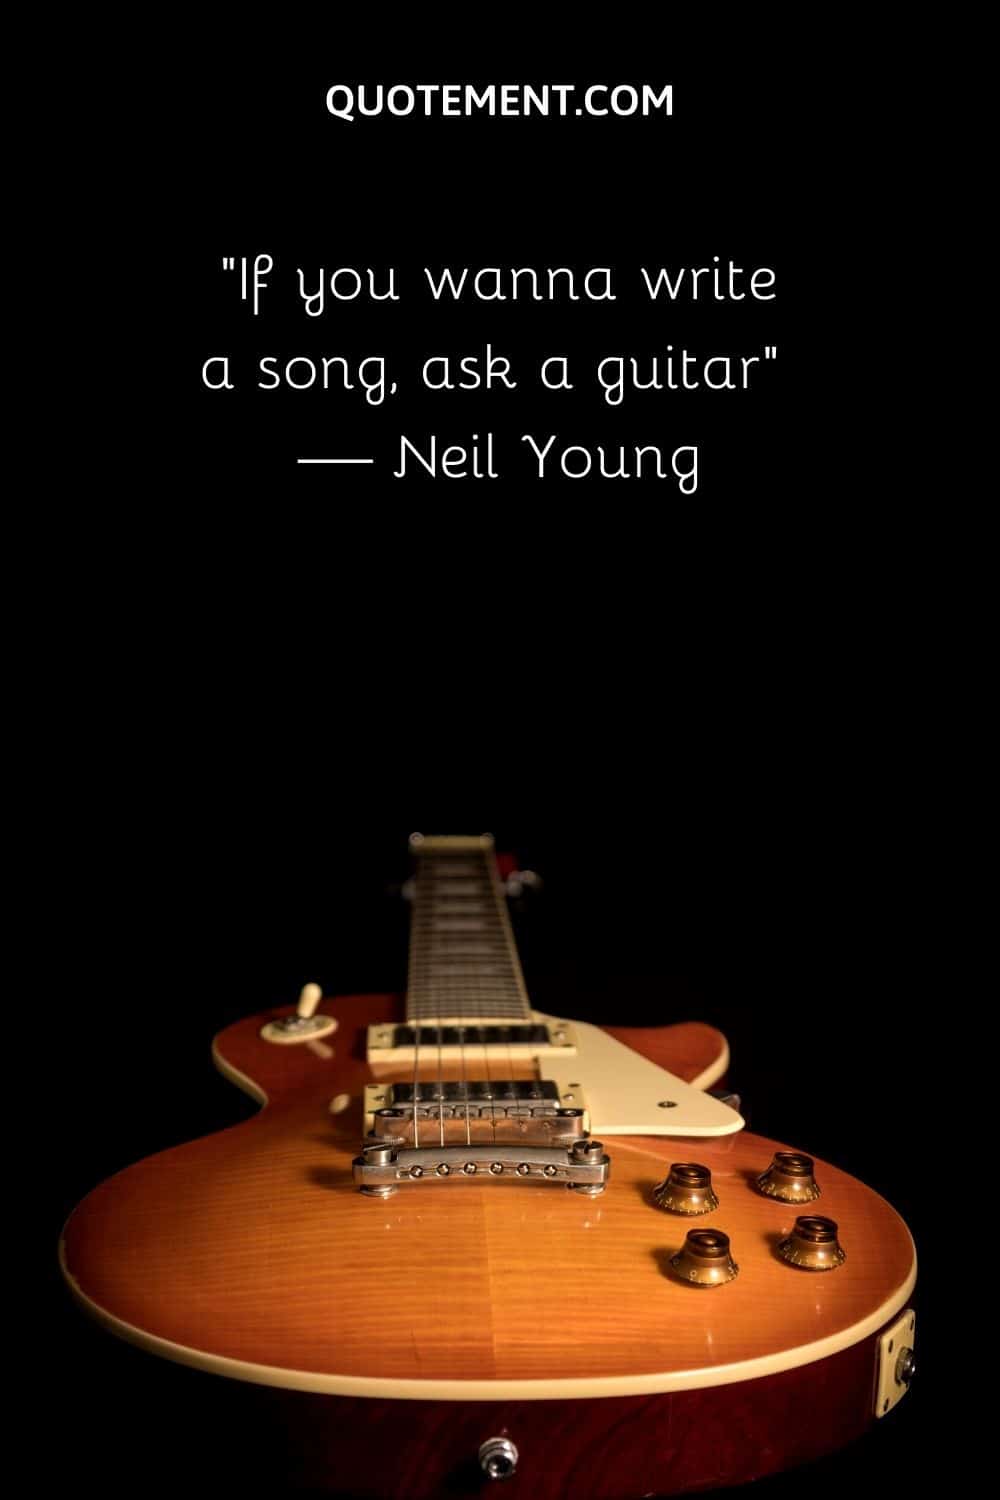 If you wanna write a song, ask a guitar